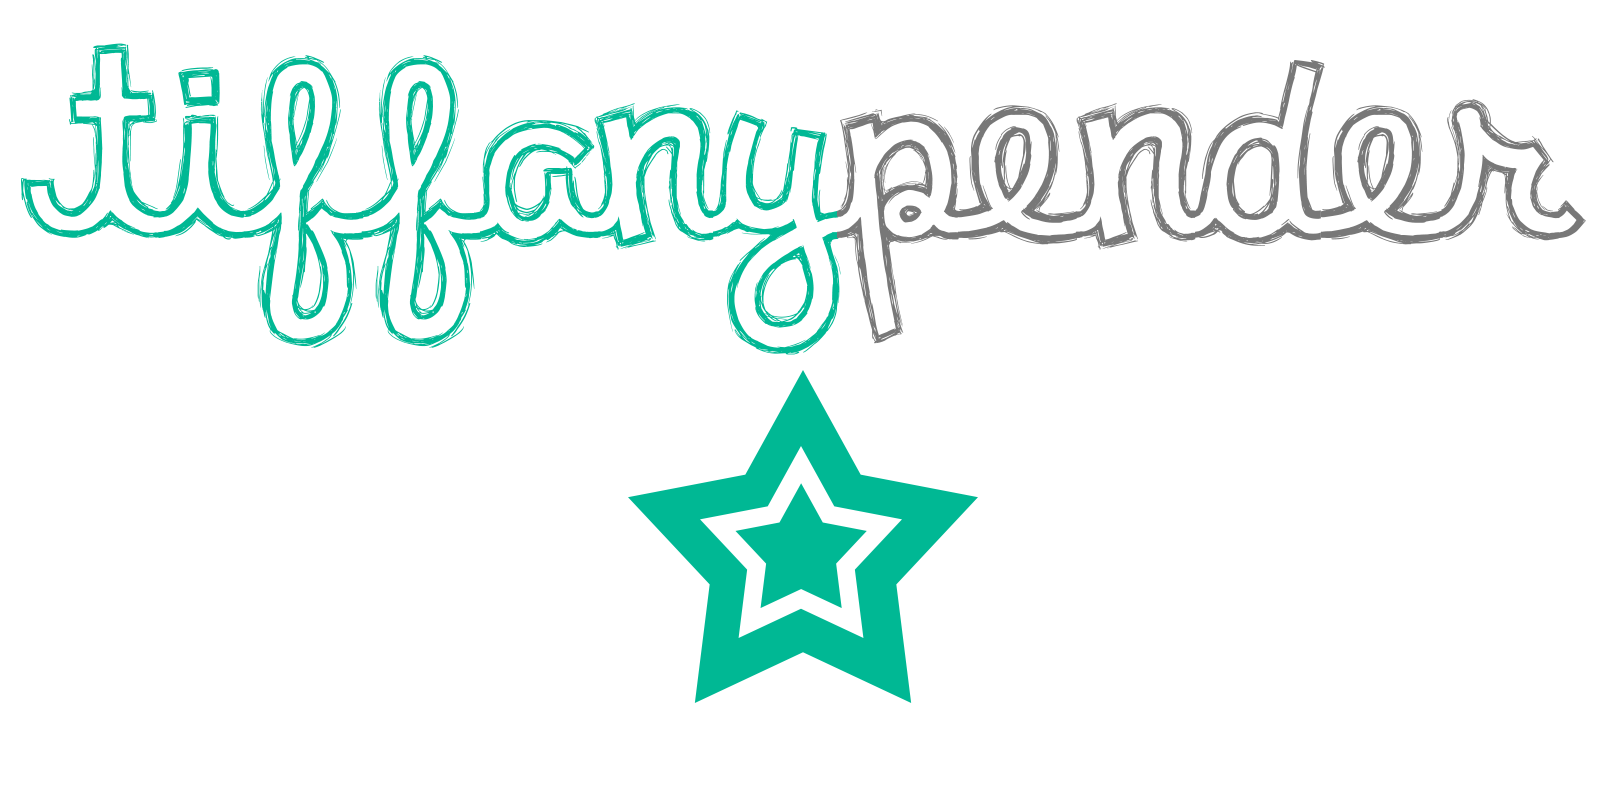 Tiffany Pender logo in green and gray script text